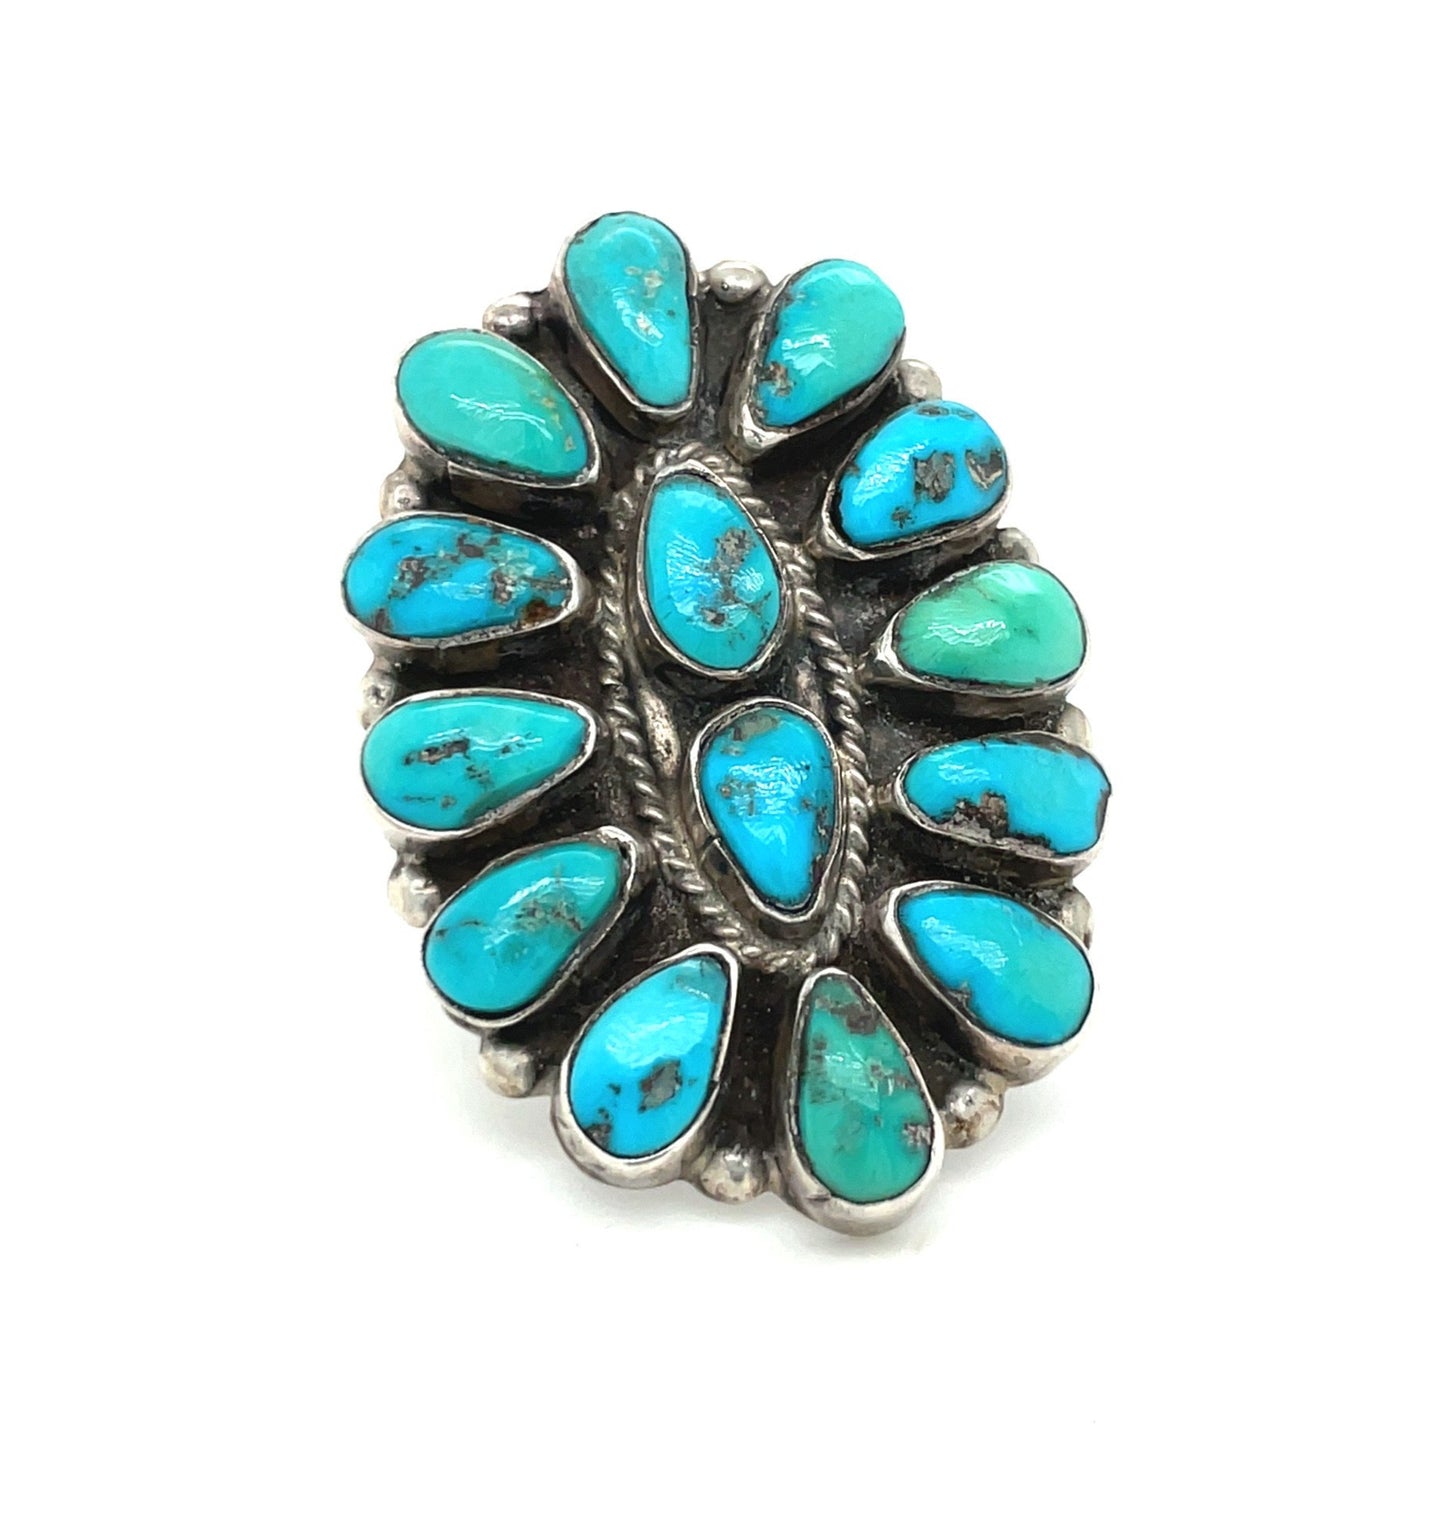 Vintage Bisbee Turquoise and Sterling Silver Ring 70’s SZ 7